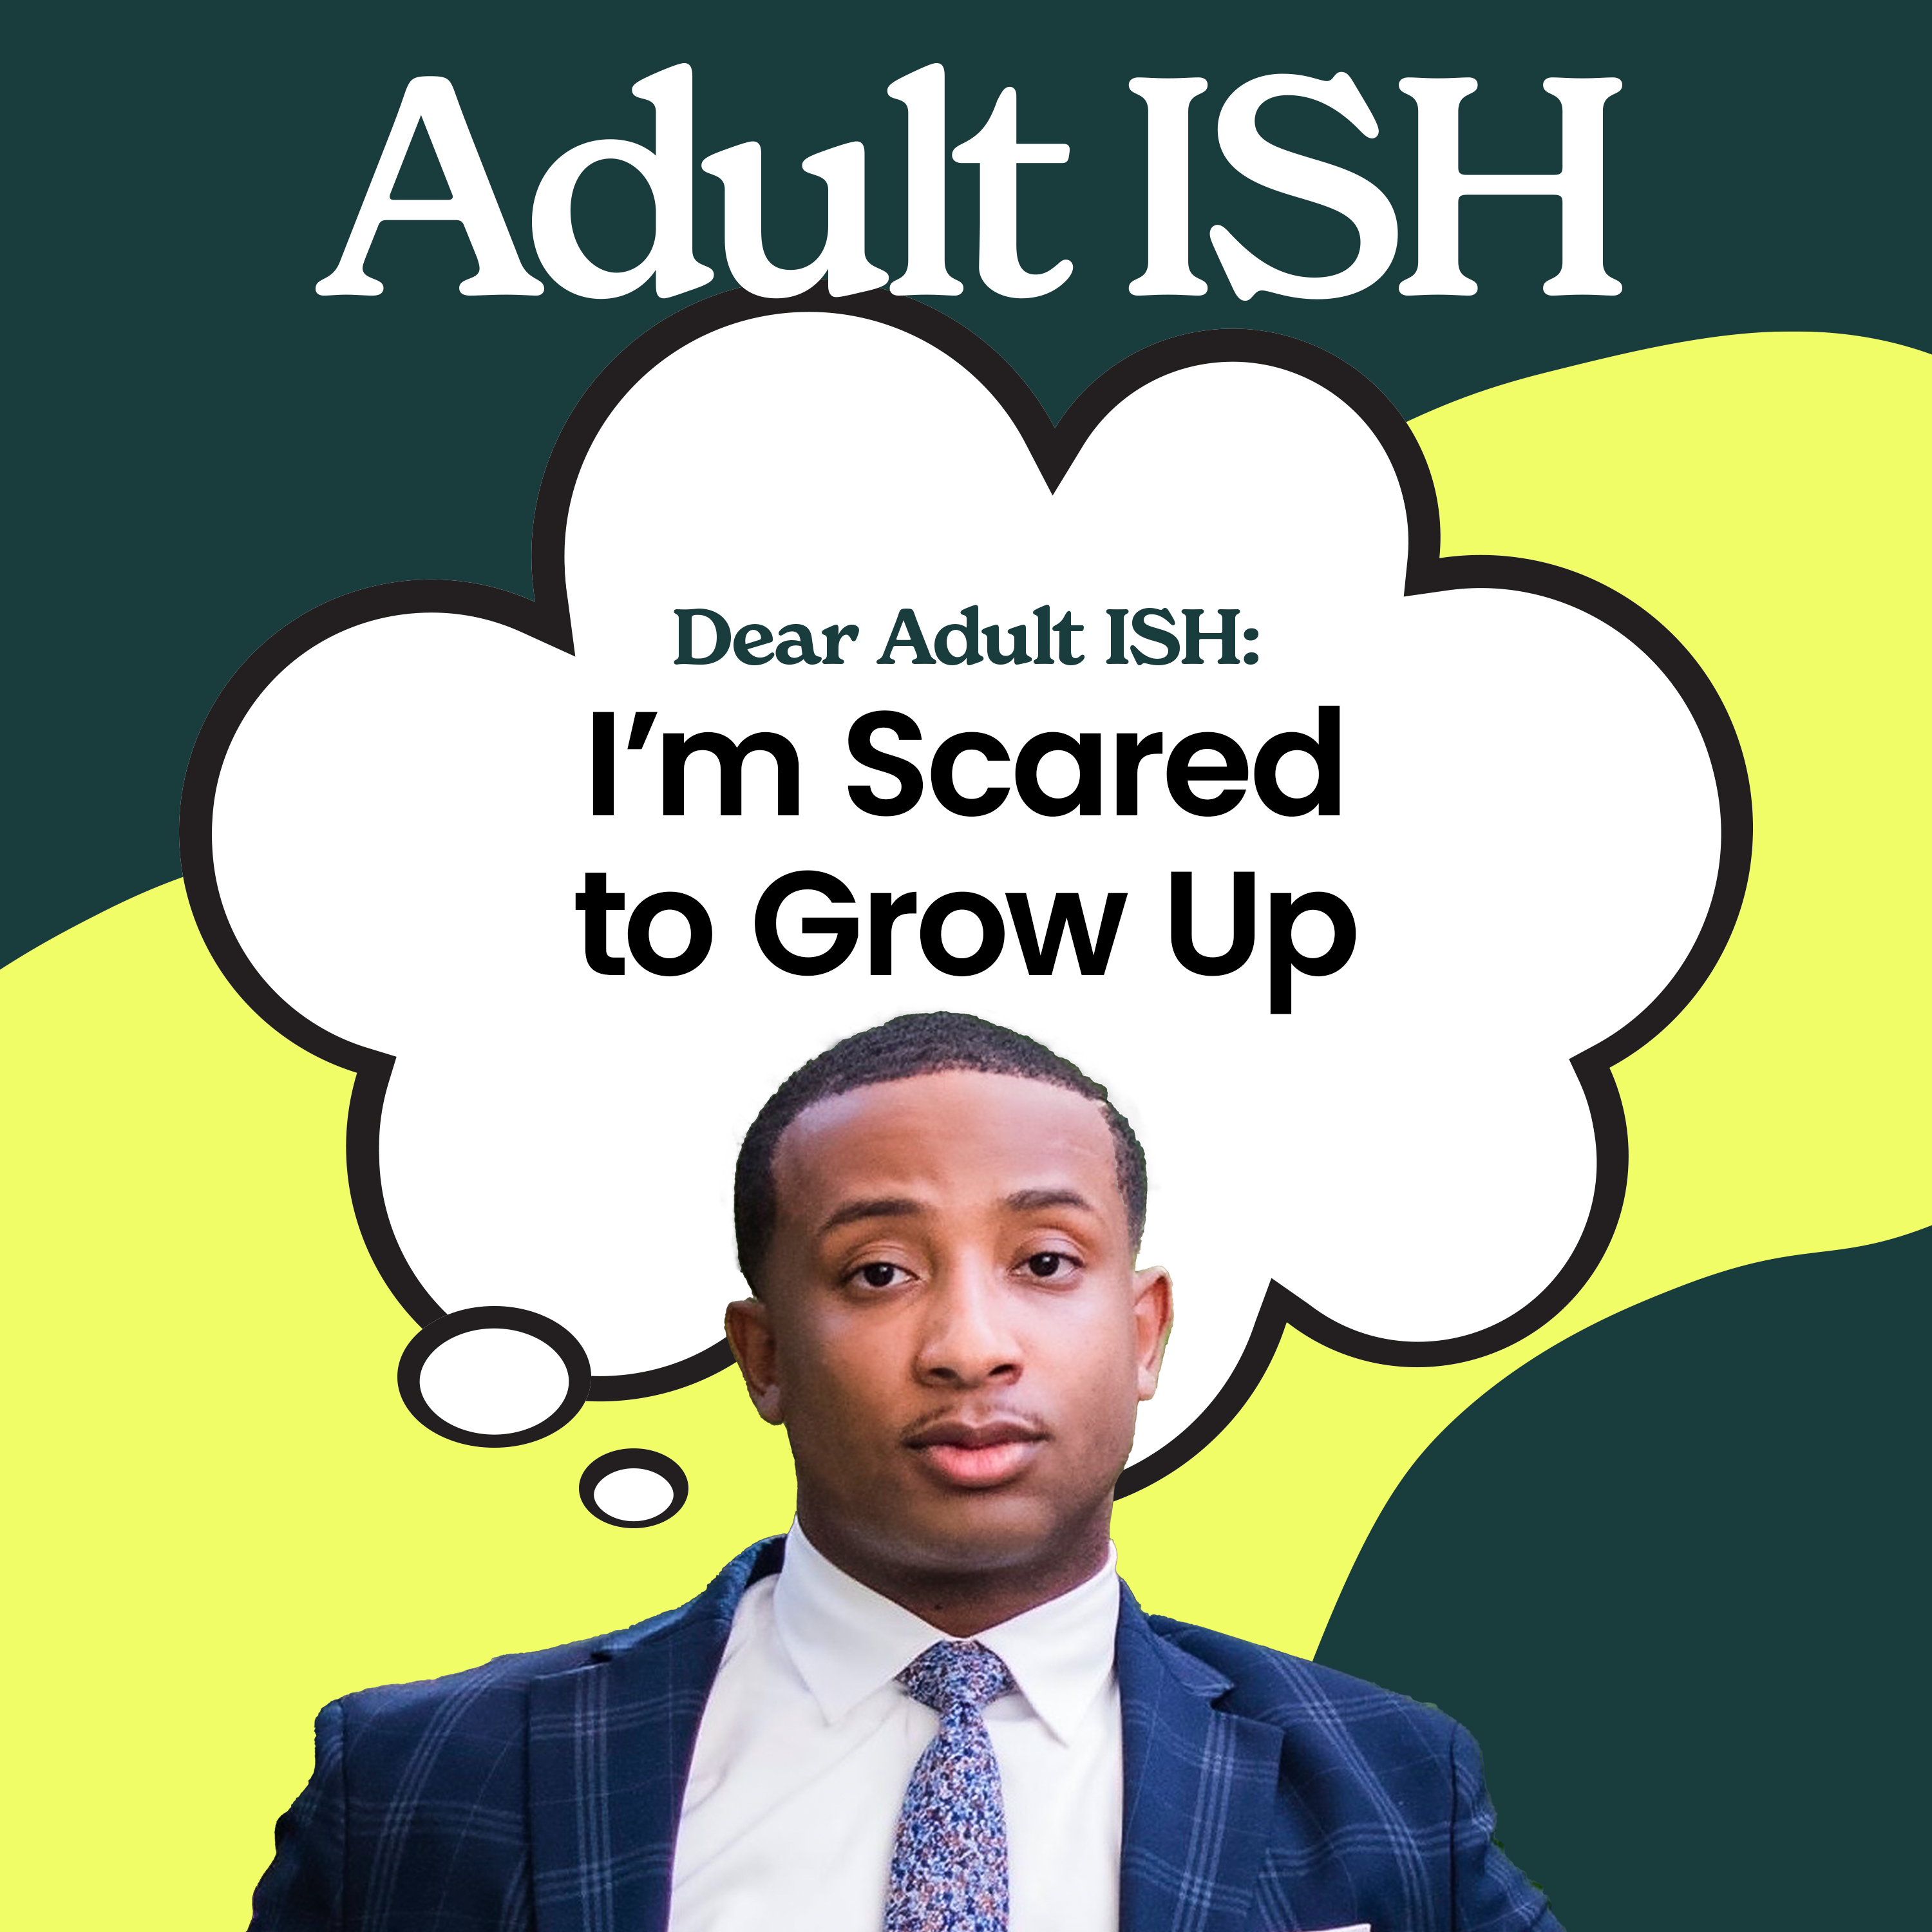 Dear Adult ISH: I’m Scared to Grow Up